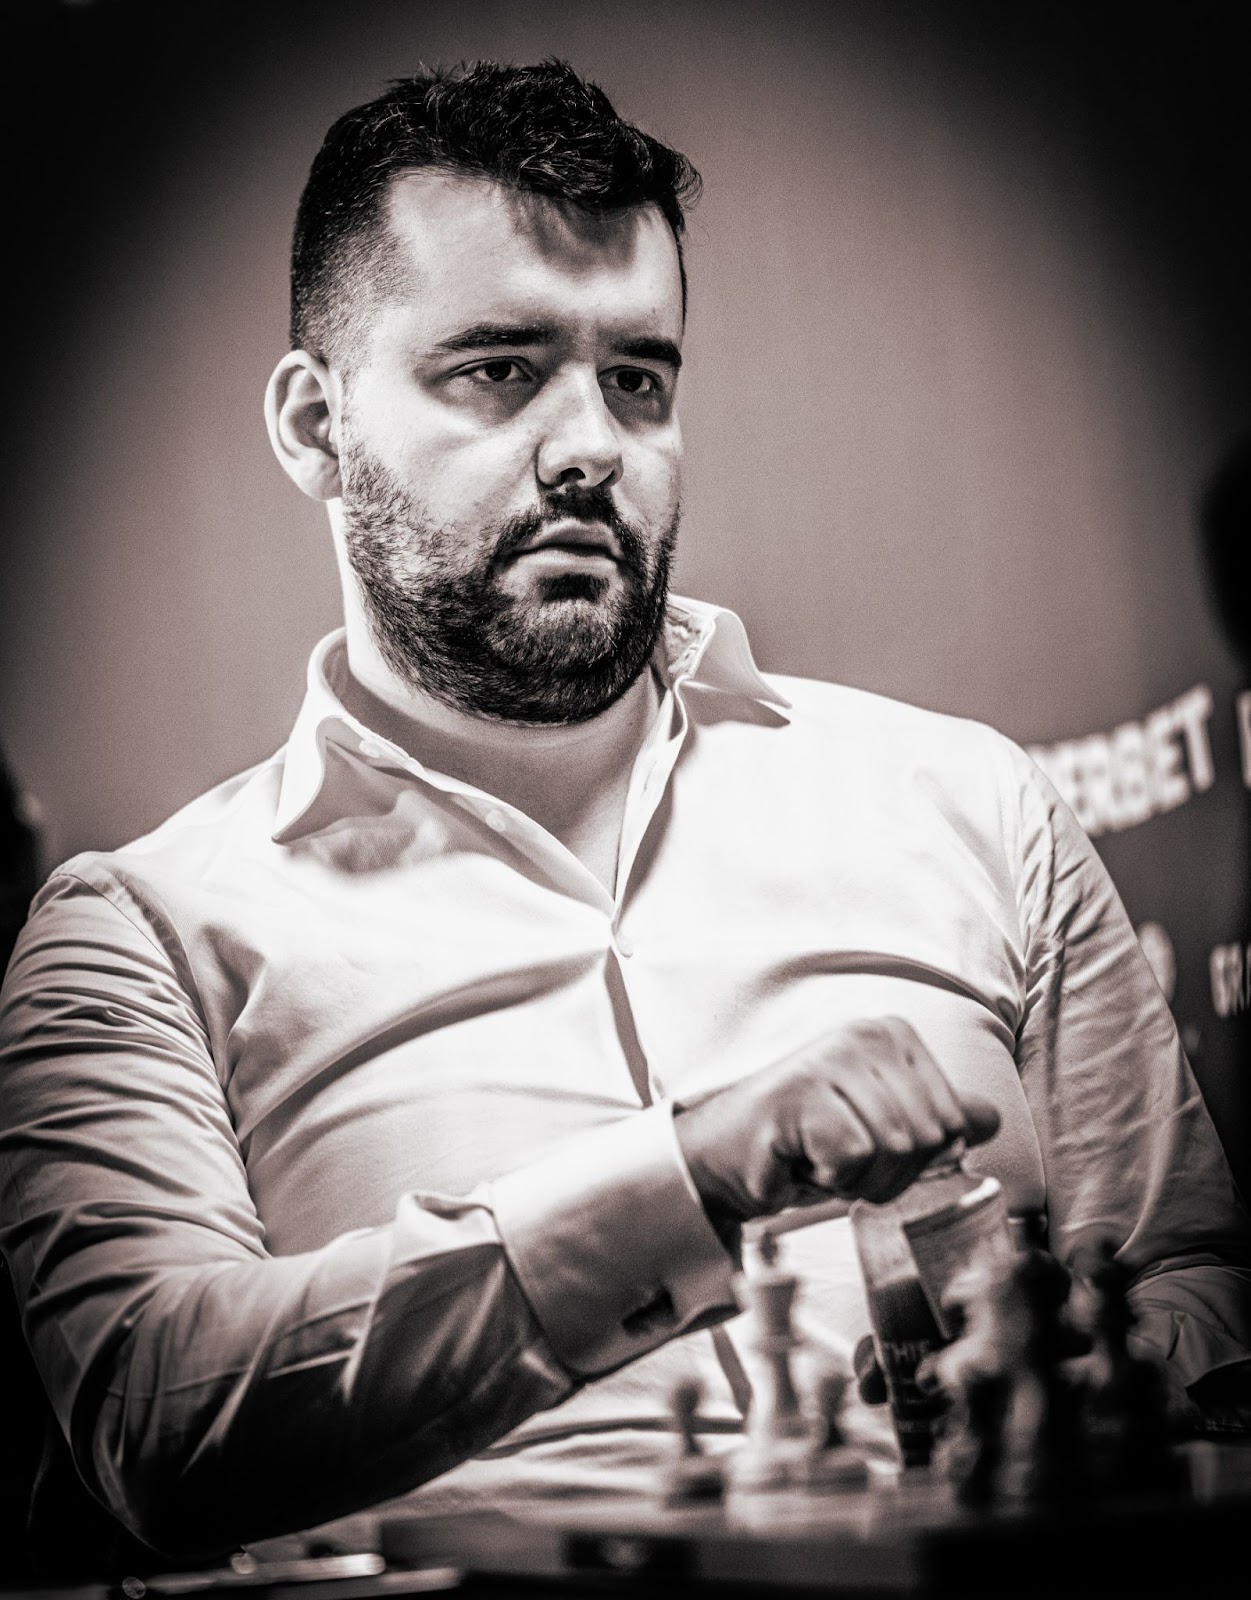 Superbet Chess Classic 2: Nepo and Rapport strike